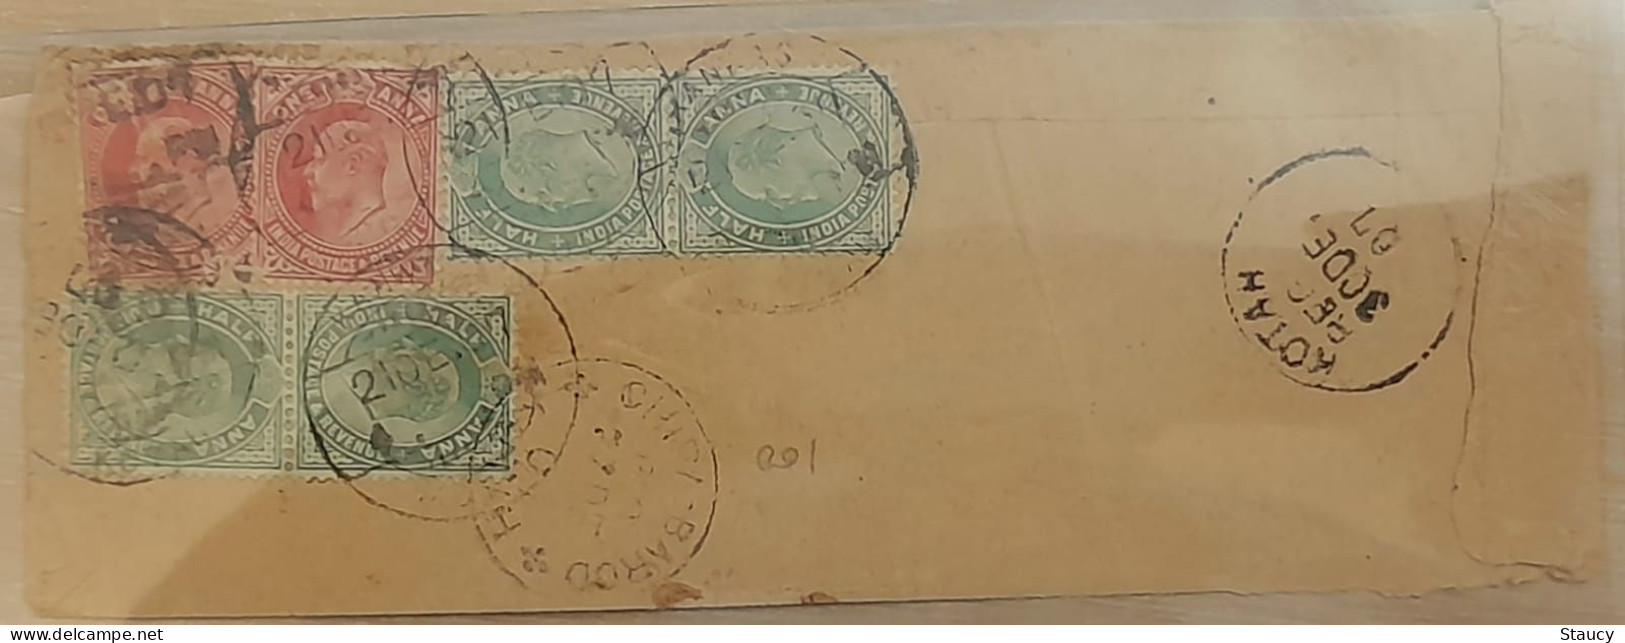 British India 1907 6 KEVII Stamps Franked On REDIRECTED Cover Nice Cancellations On Front & Back As Per Scan - Jaipur